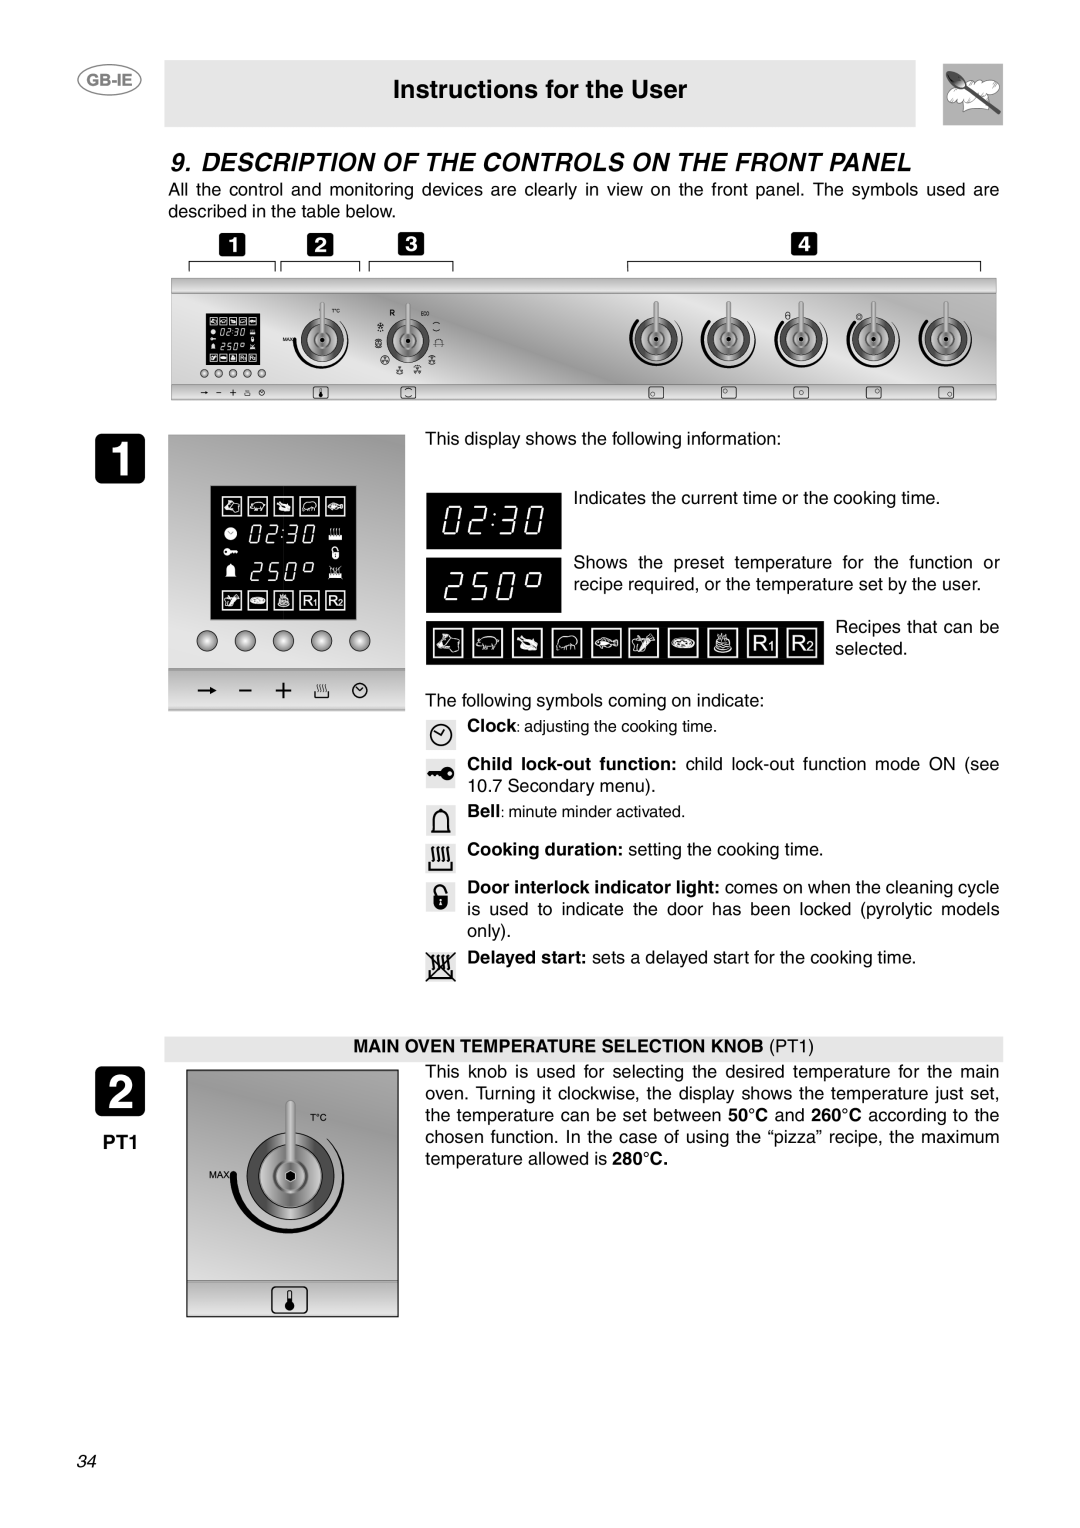 Smeg CE9CMX manual Description Of The Controls On The Front Panel, Instructions for the User 